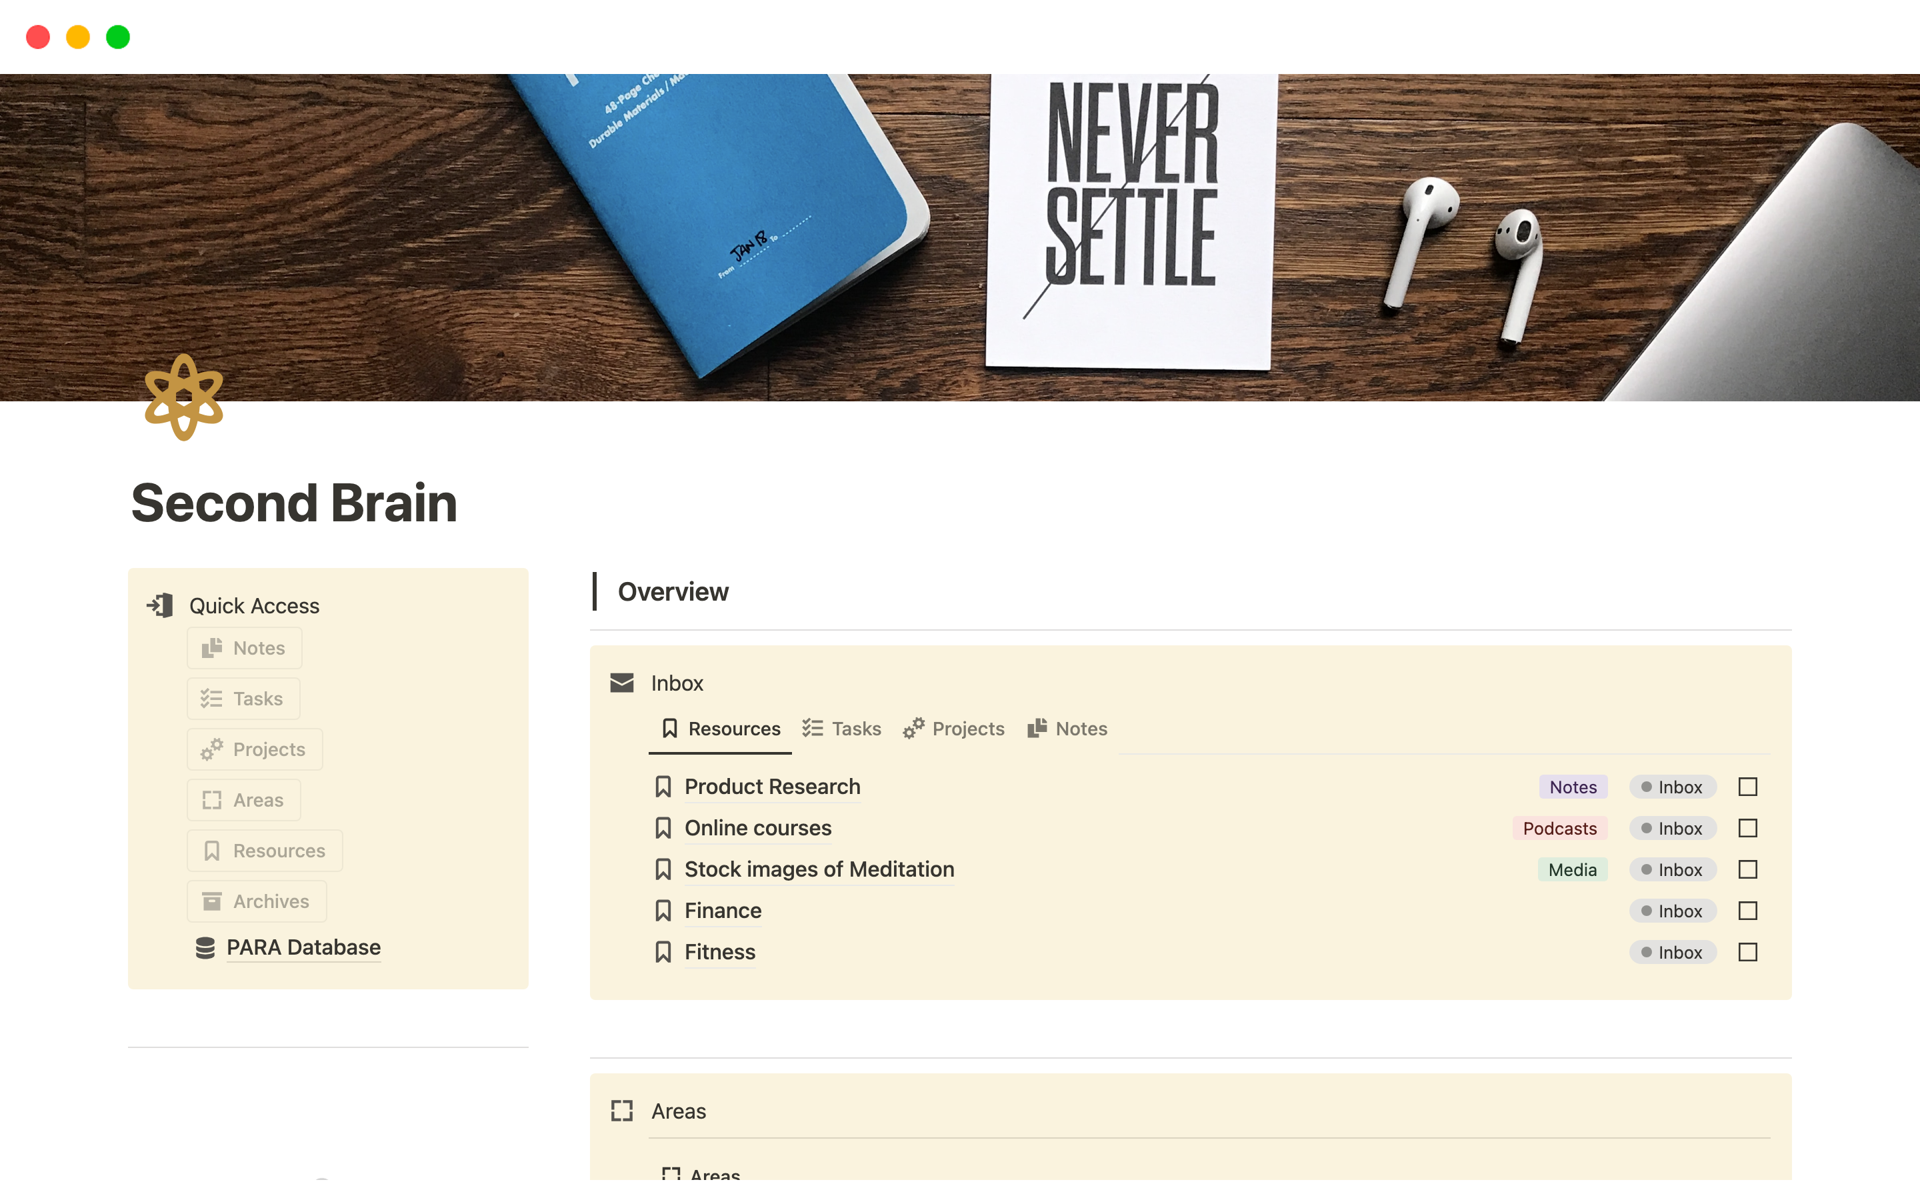 Second Brain Notion template promises to deliver, offering you a superior tool that enhances productivity, aids note-taking, sharpens goal-setting, combats procrastination, and fosters healthy habits.